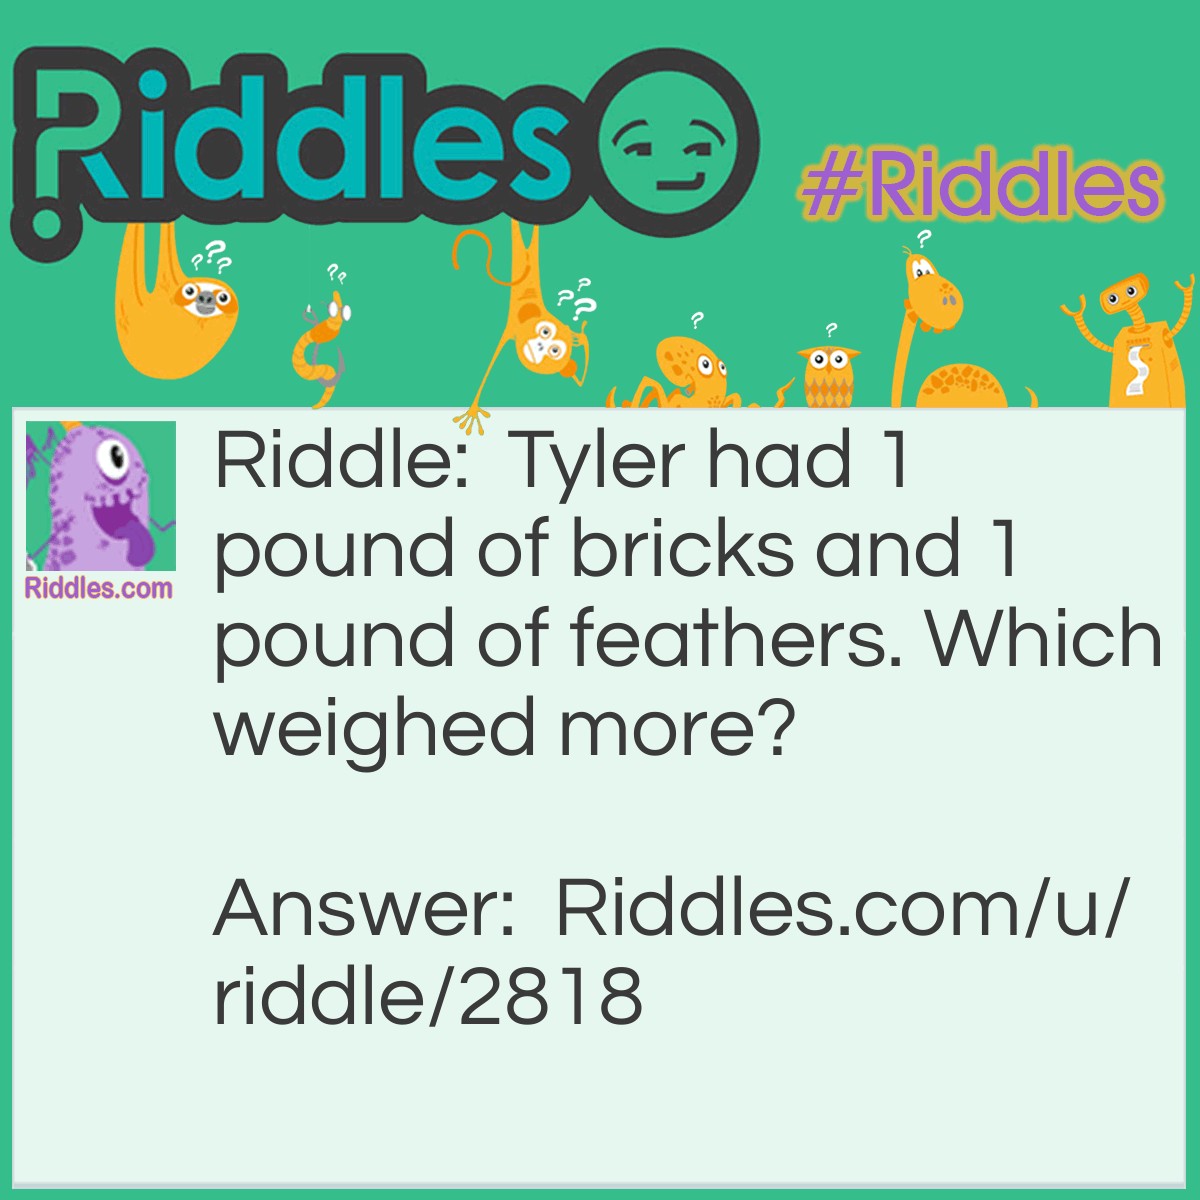 Riddle: Tyler had 1 pound of bricks and 1 pound of feathers. Which weighed more? Answer: Neither because they were both 1 pound!!!